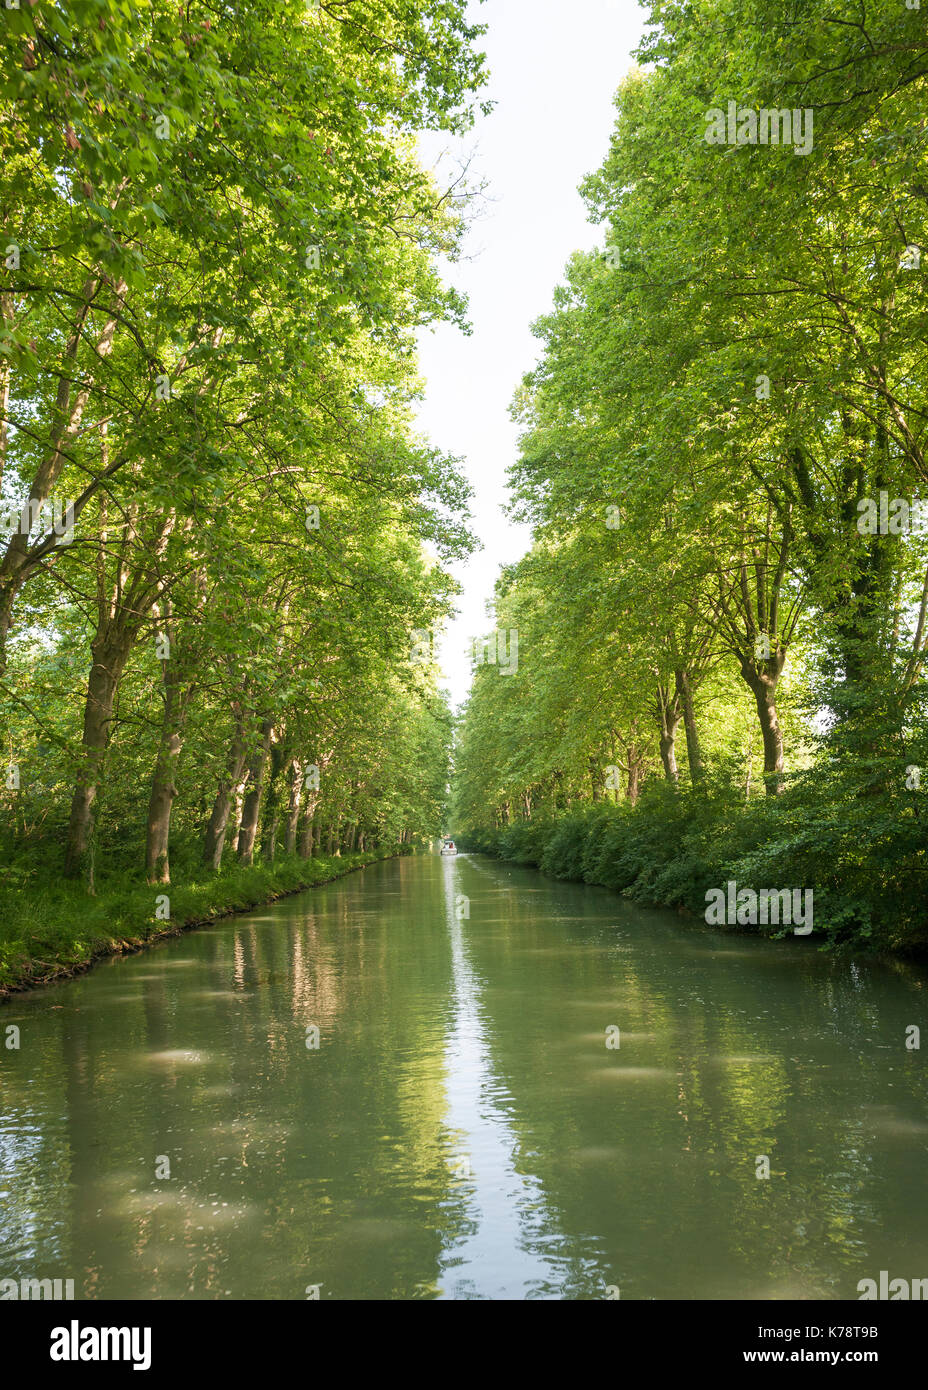 The tree lined Canal latéral à la Garonne in the Dordogne region of southwest France. Stock Photo